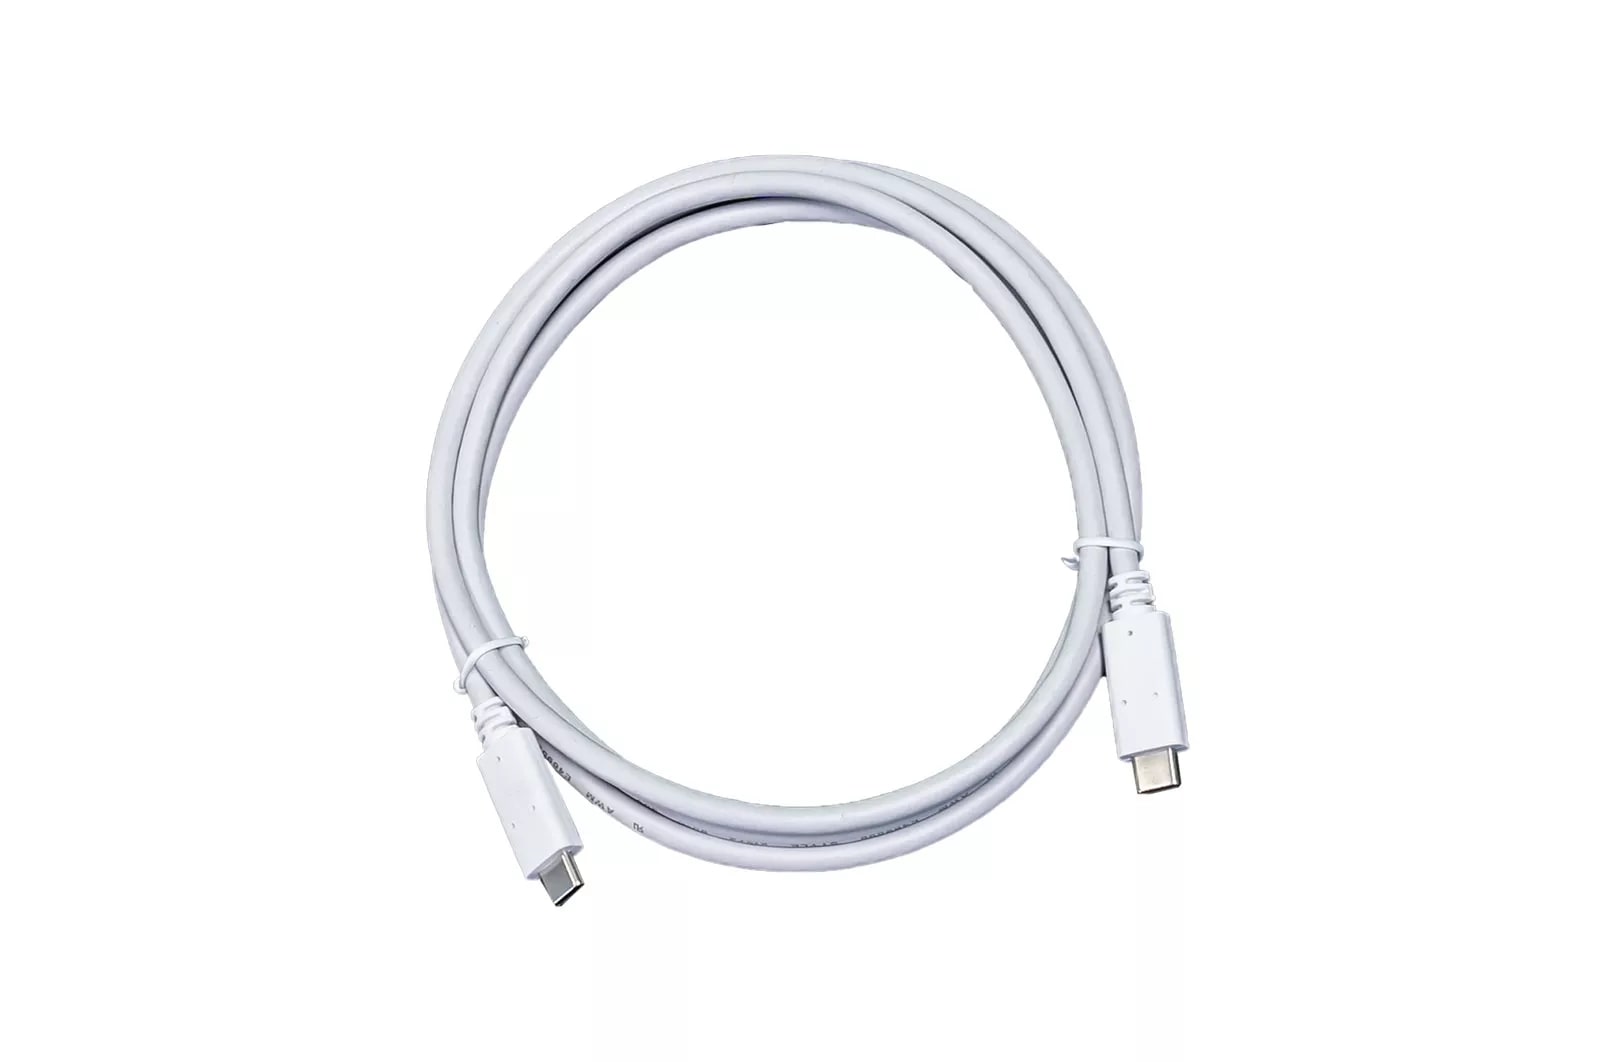 LG Monitor USB Type-C Cable - EAD63932606